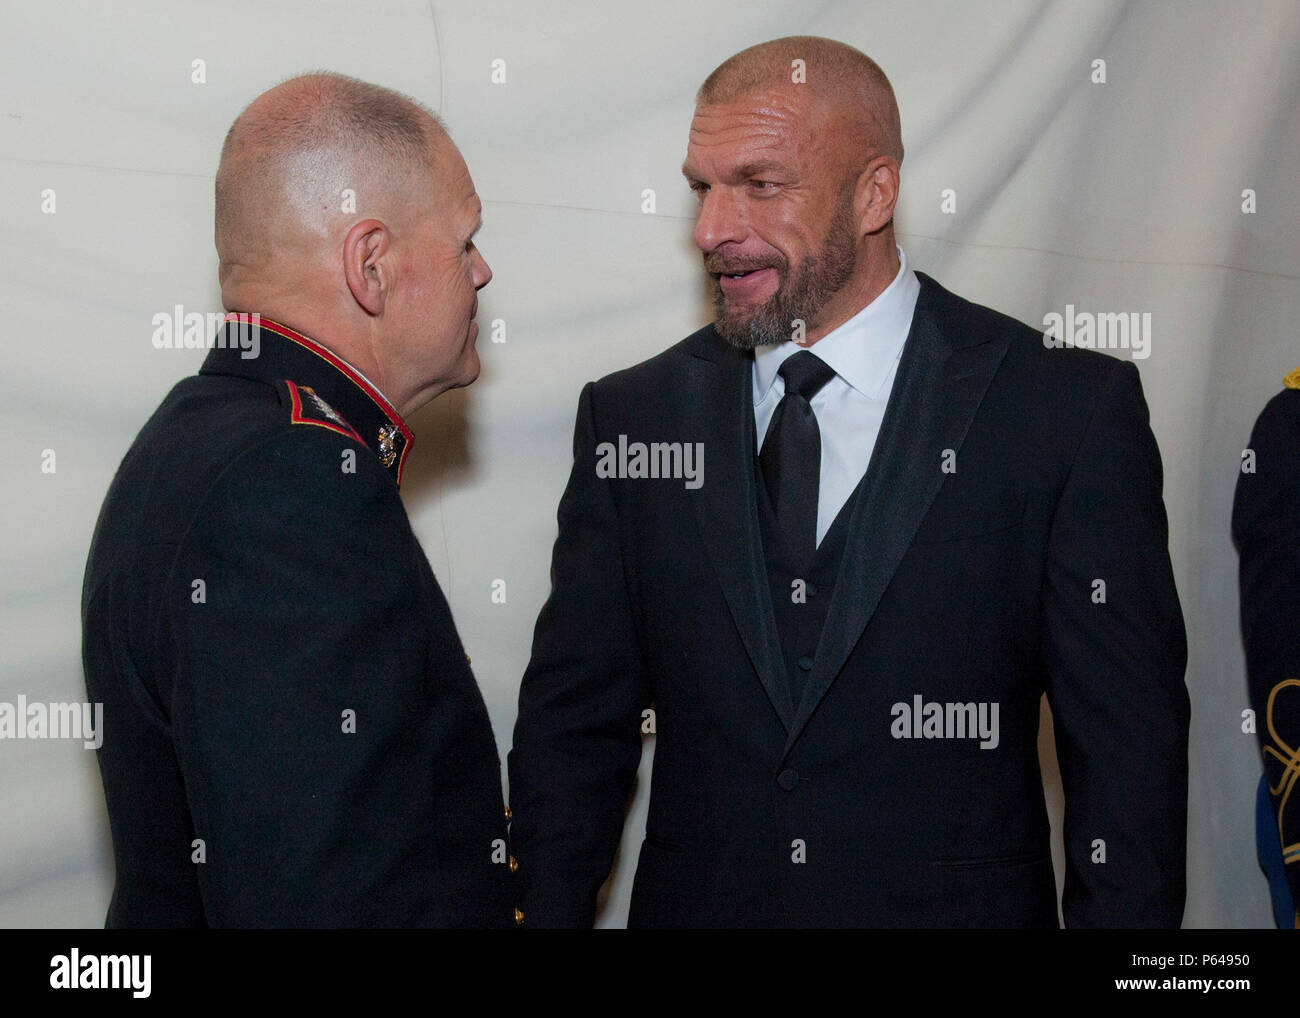 U.S. Marine Corps Gen. Robert B. Neller, 37th Commandant of the Marine Corps, speaks with Paul M. Levesque “Triple H”, American professional wrestler, during the reception before the United Service Organizations (USO) of Metropolitan Washington Annual Gala in Arlington, Va., April 19, 2016. The Gala was held in honor of the 75th Anniversary of the Metropolitan Washington USO.  (U.S. Marine Corps photo by Lance Cpl. Hailey D. Stuart/Released) Stock Photo